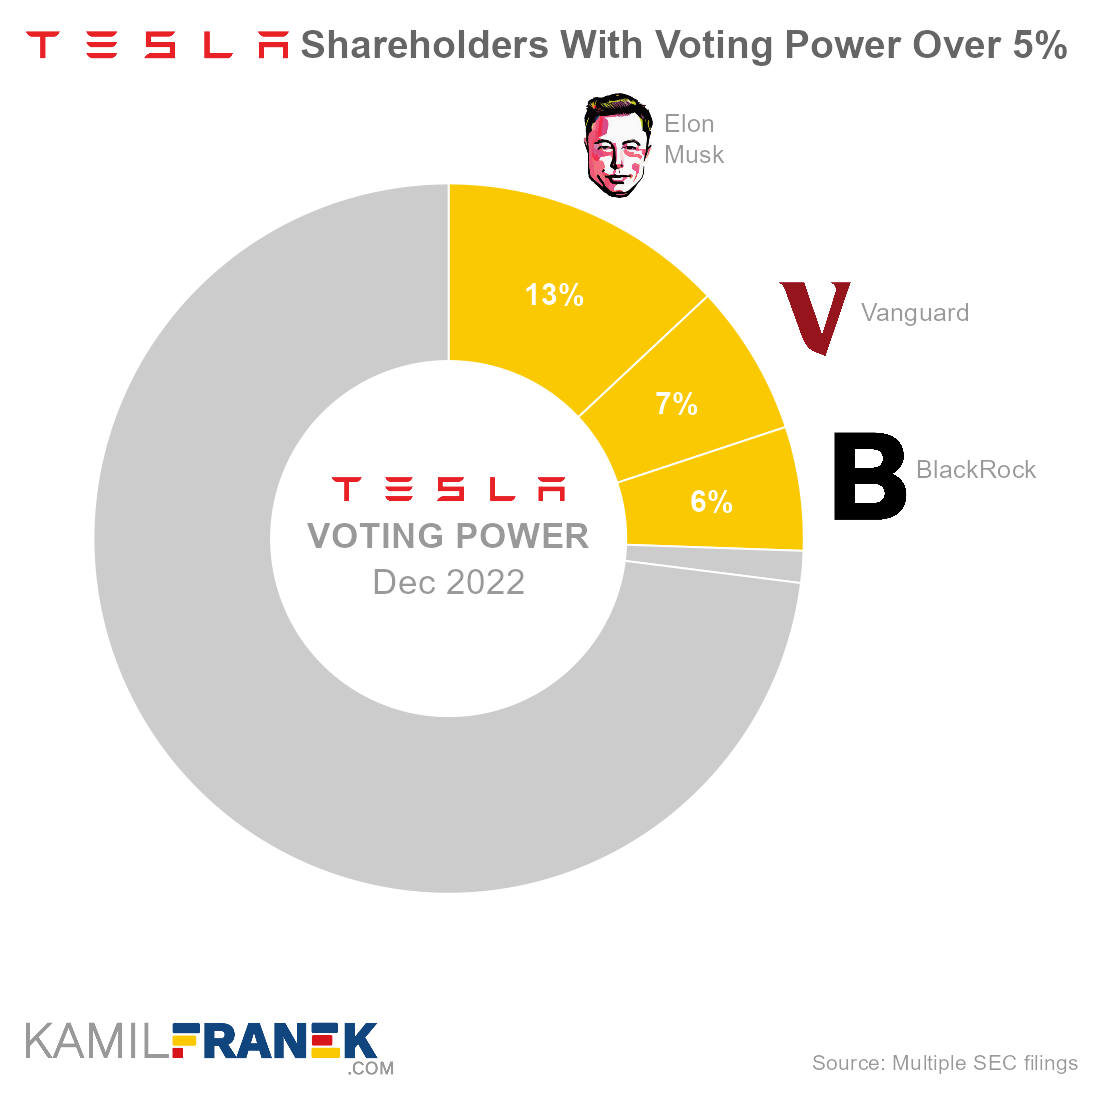 Who Owns Tesla The Largest Shareholders Overview KAMIL FRANEK